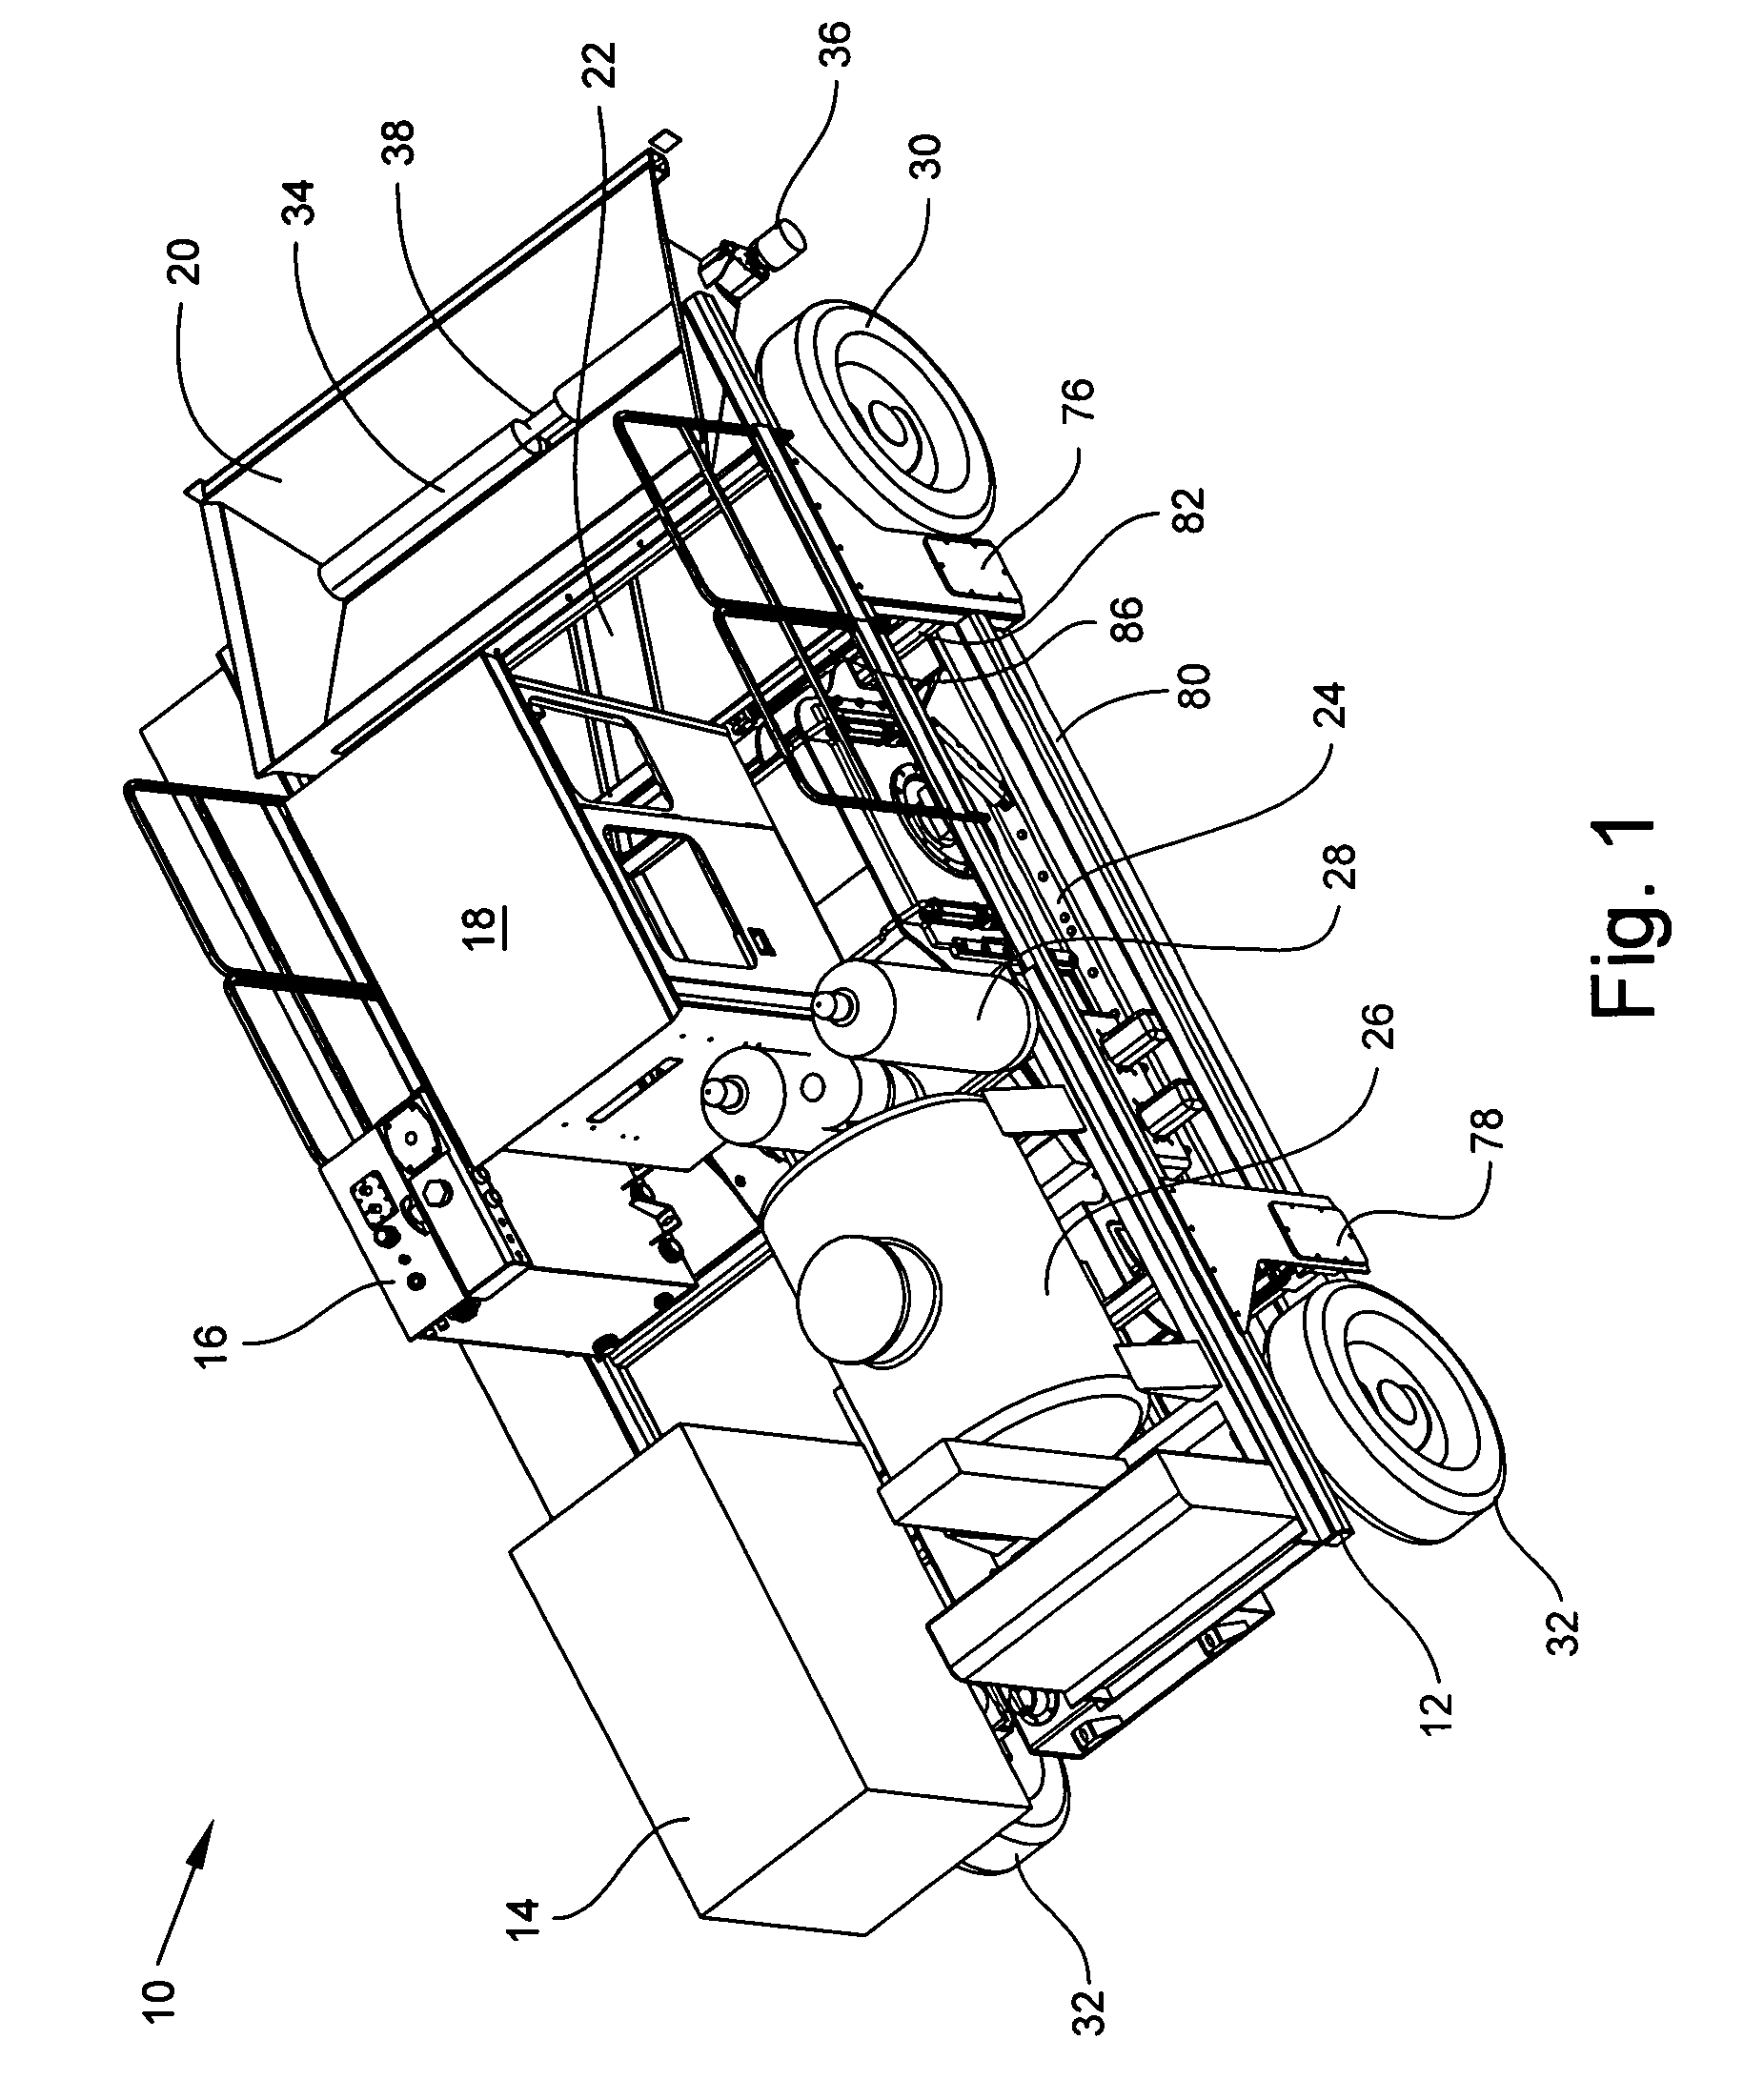 Pavement recycling machine and method of recycling pavement